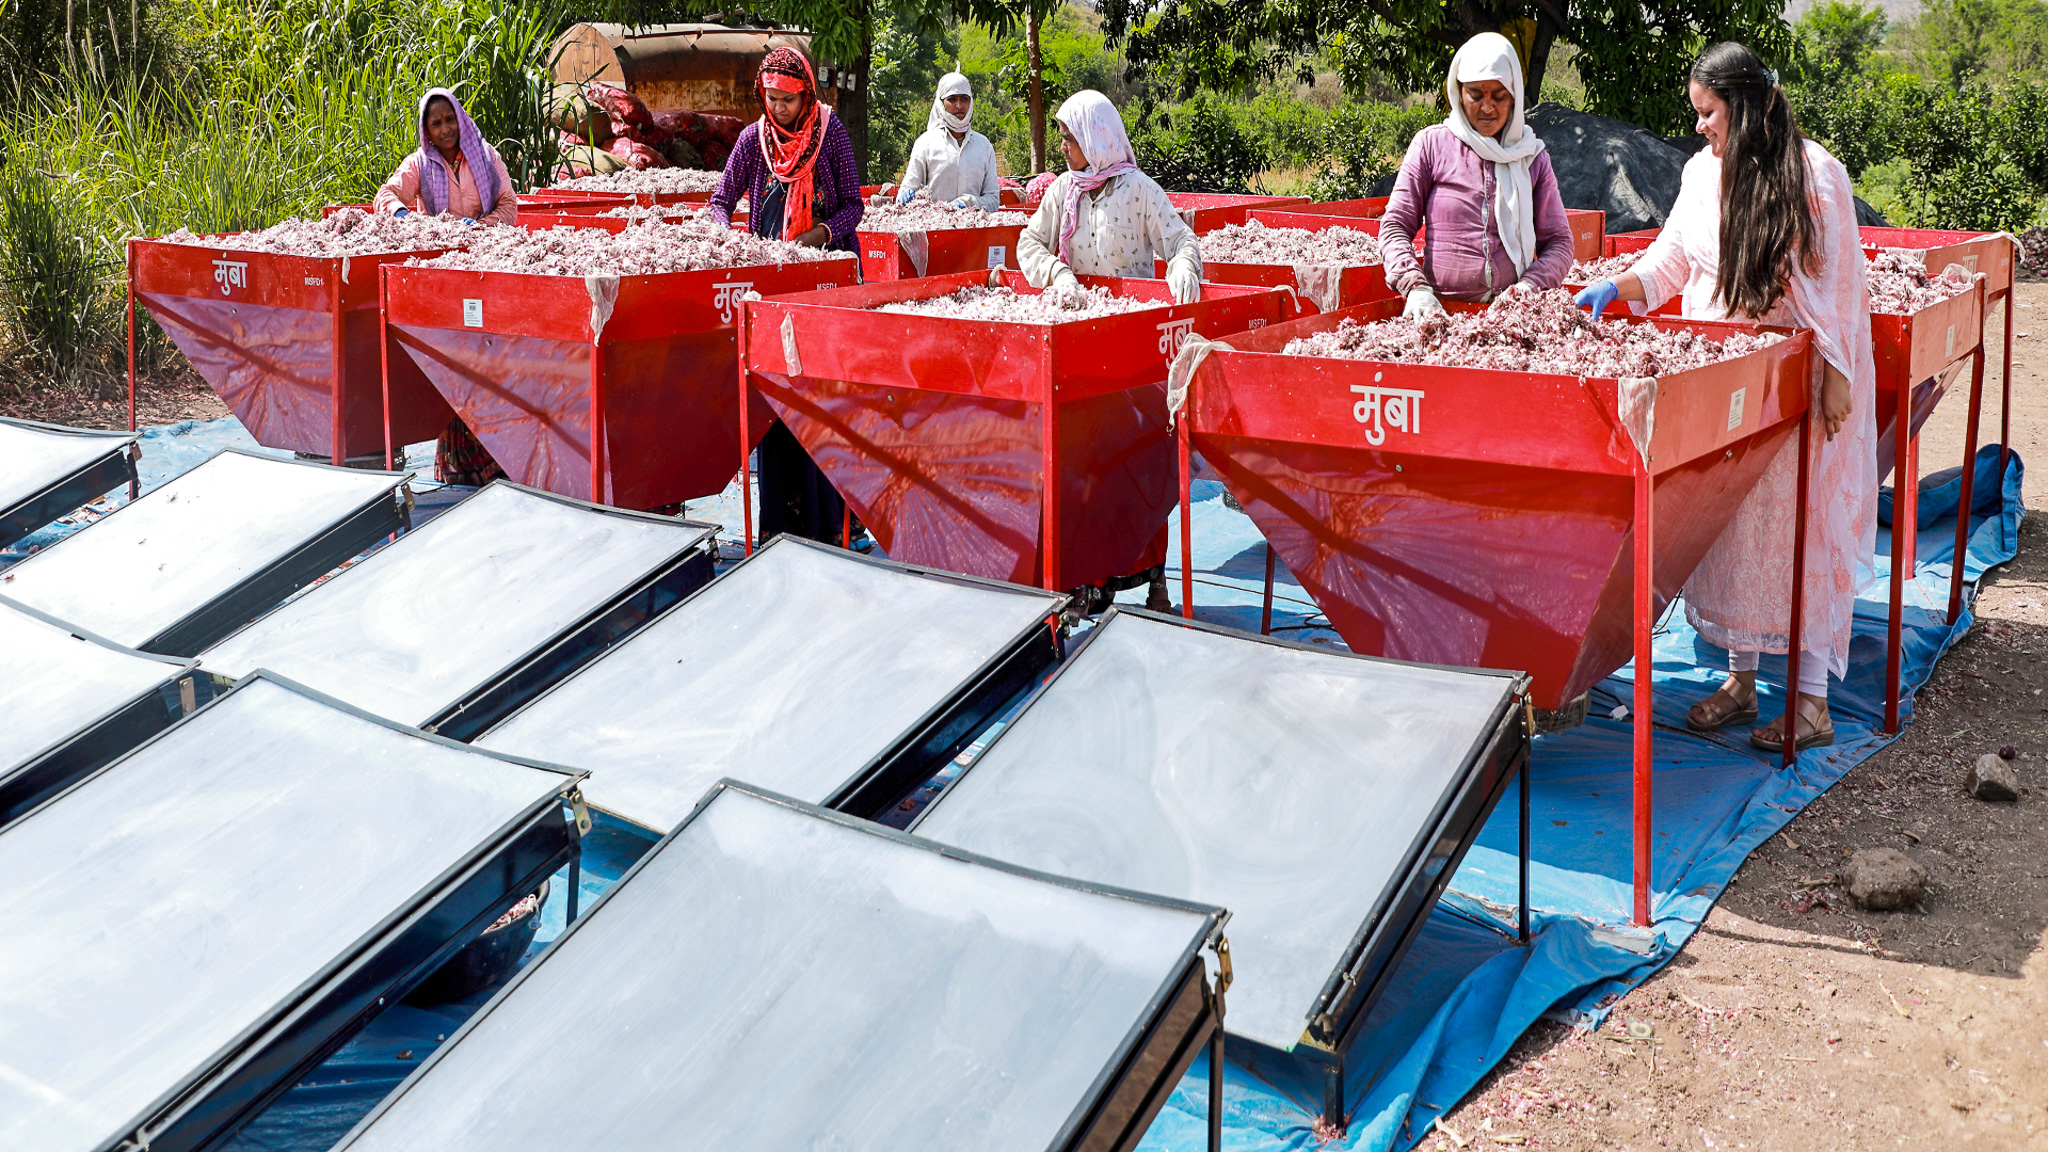 Women drying food using the solar dryers